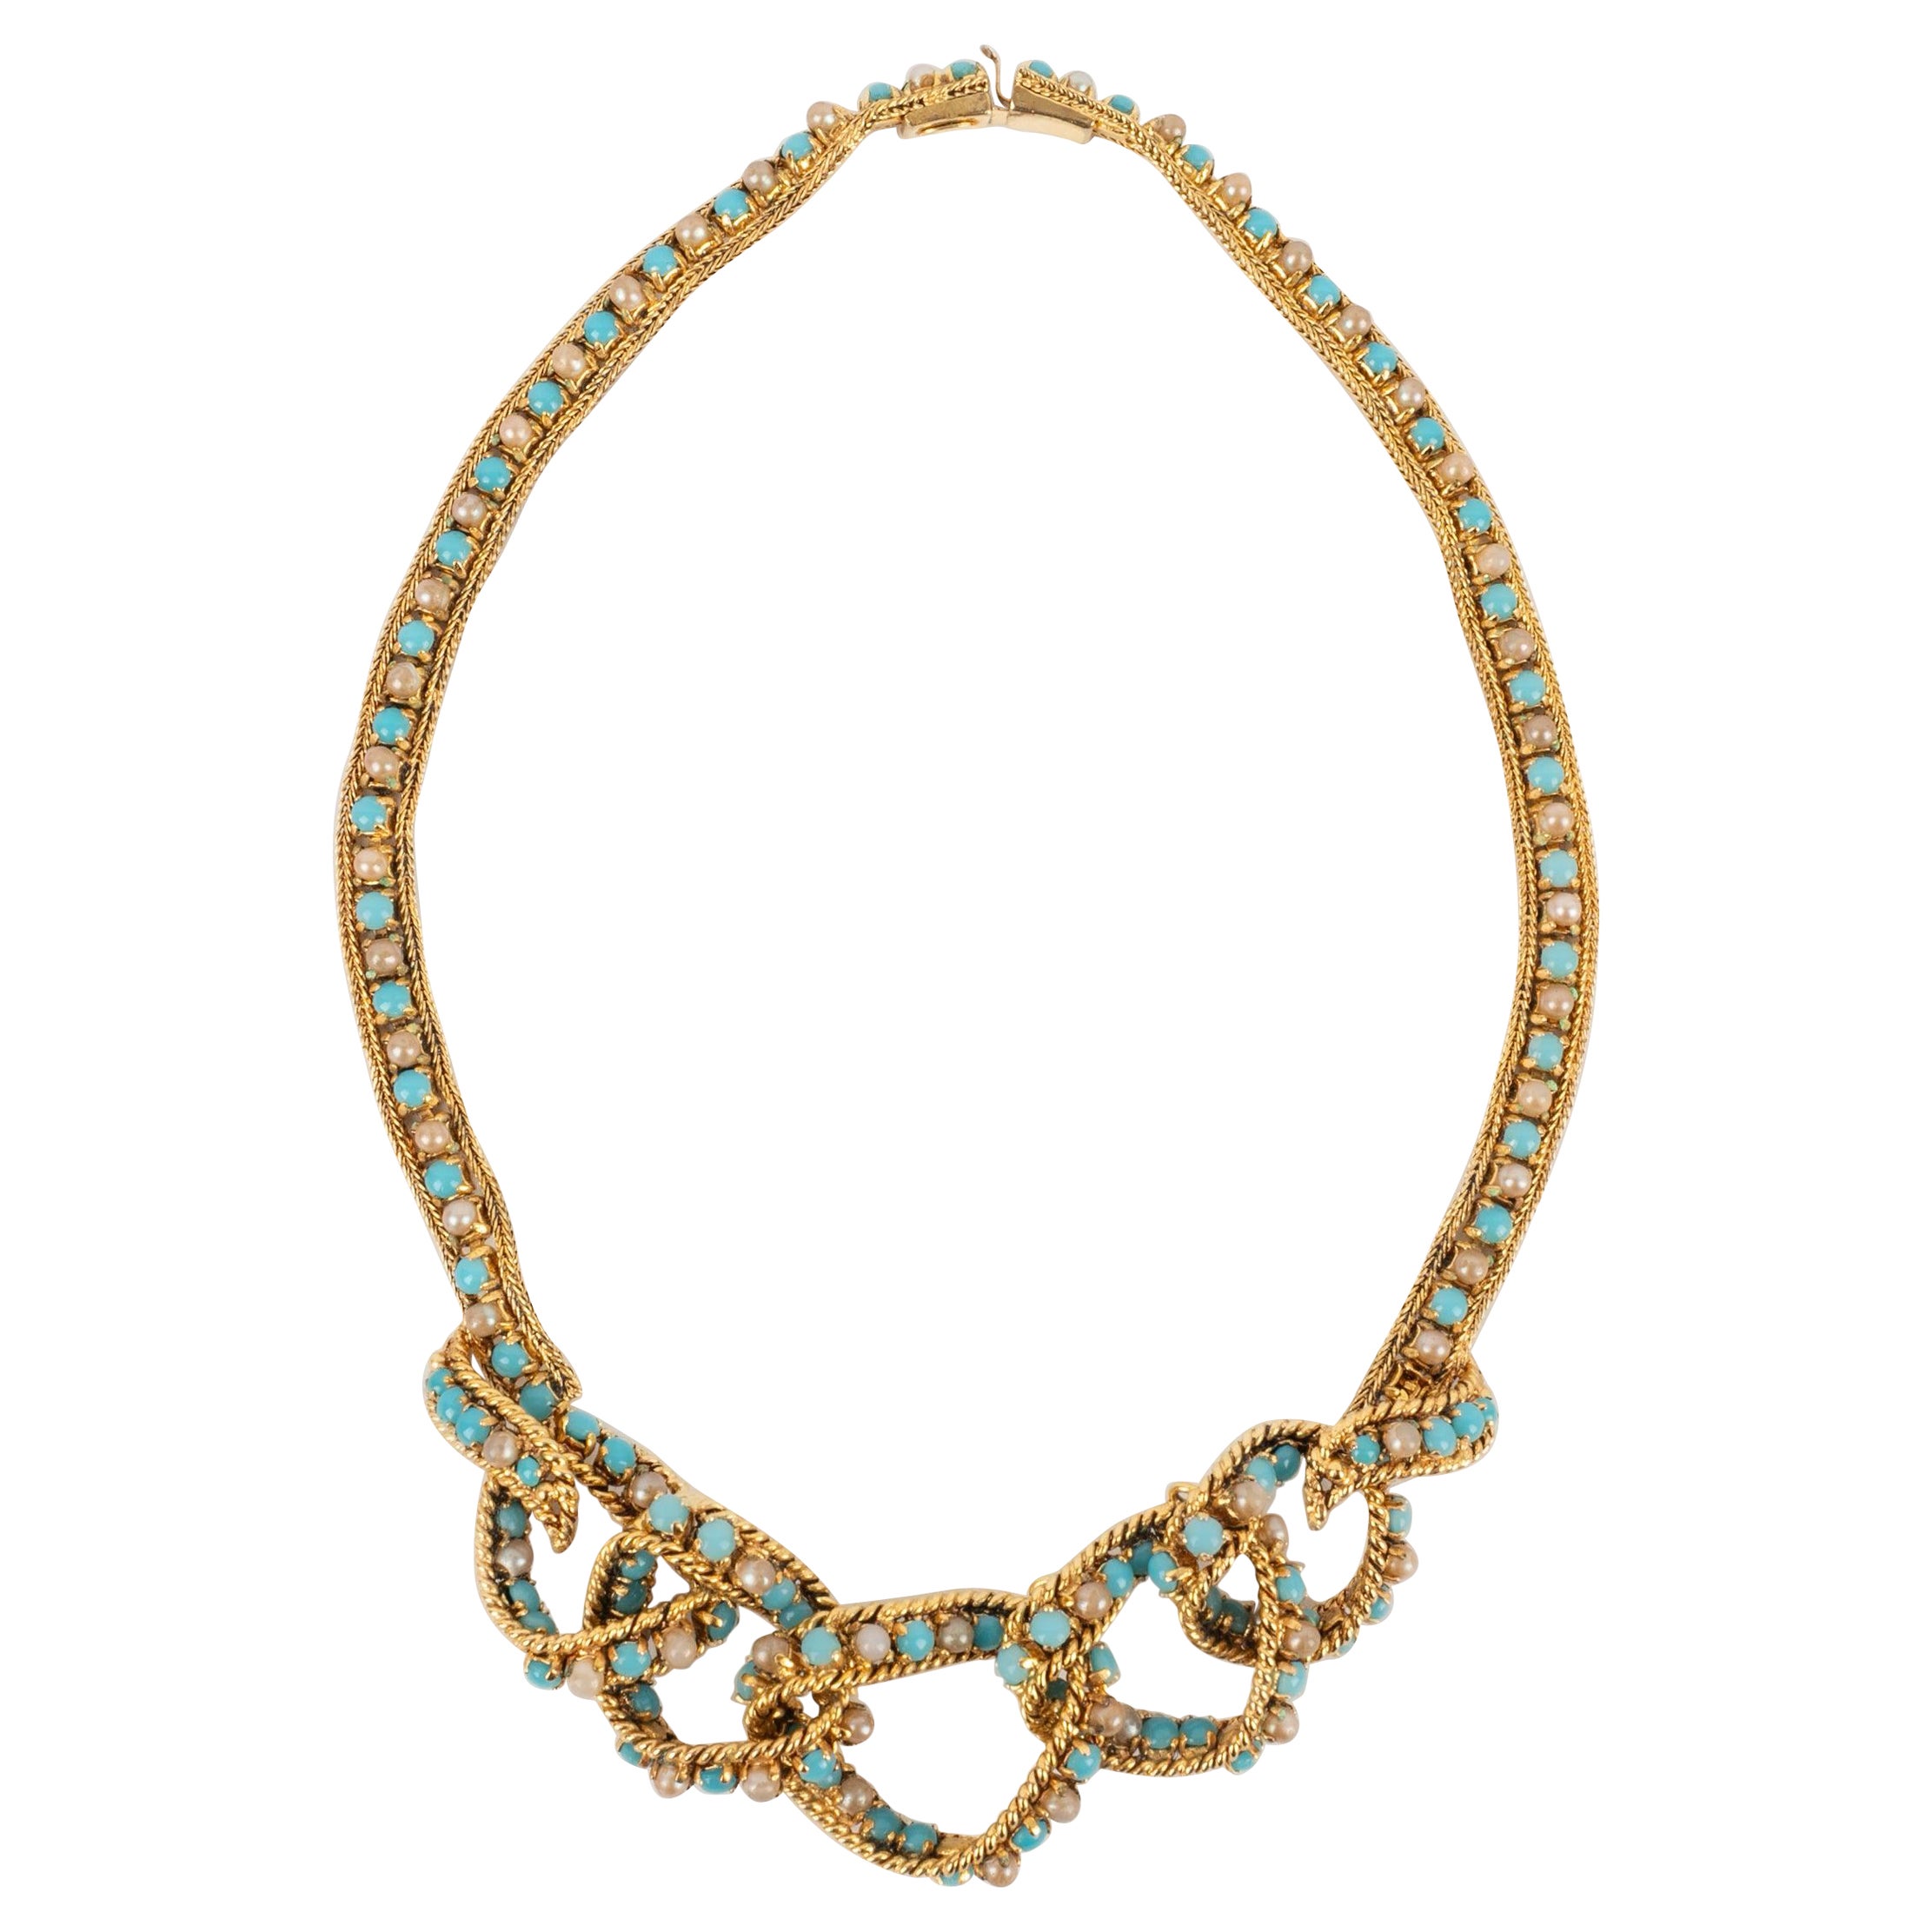 Dior Golden Metal Necklace with Costume Pearly Cabochons, 1965